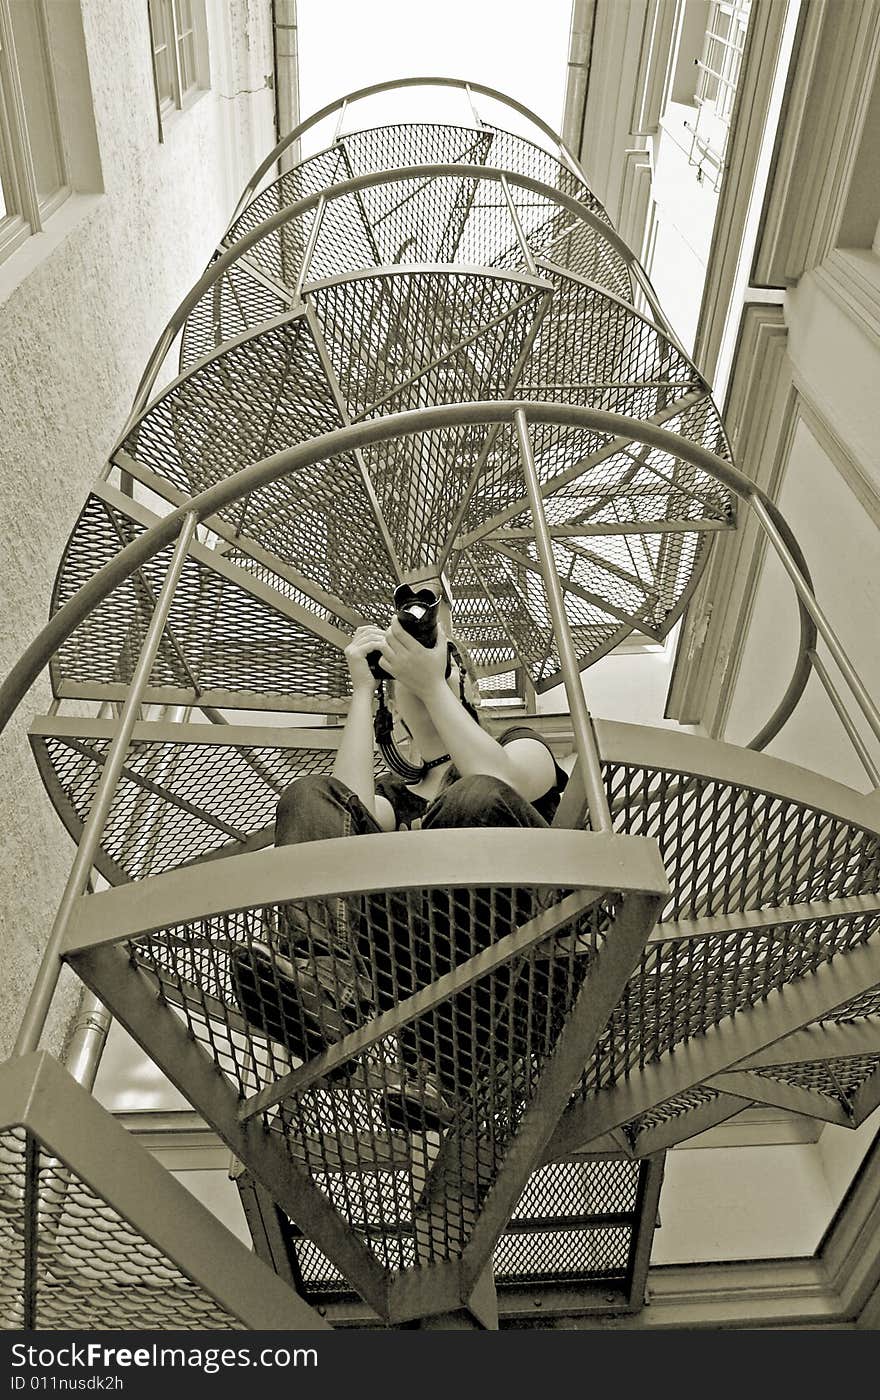 The photographer on spiral staircase. The photographer on spiral staircase.